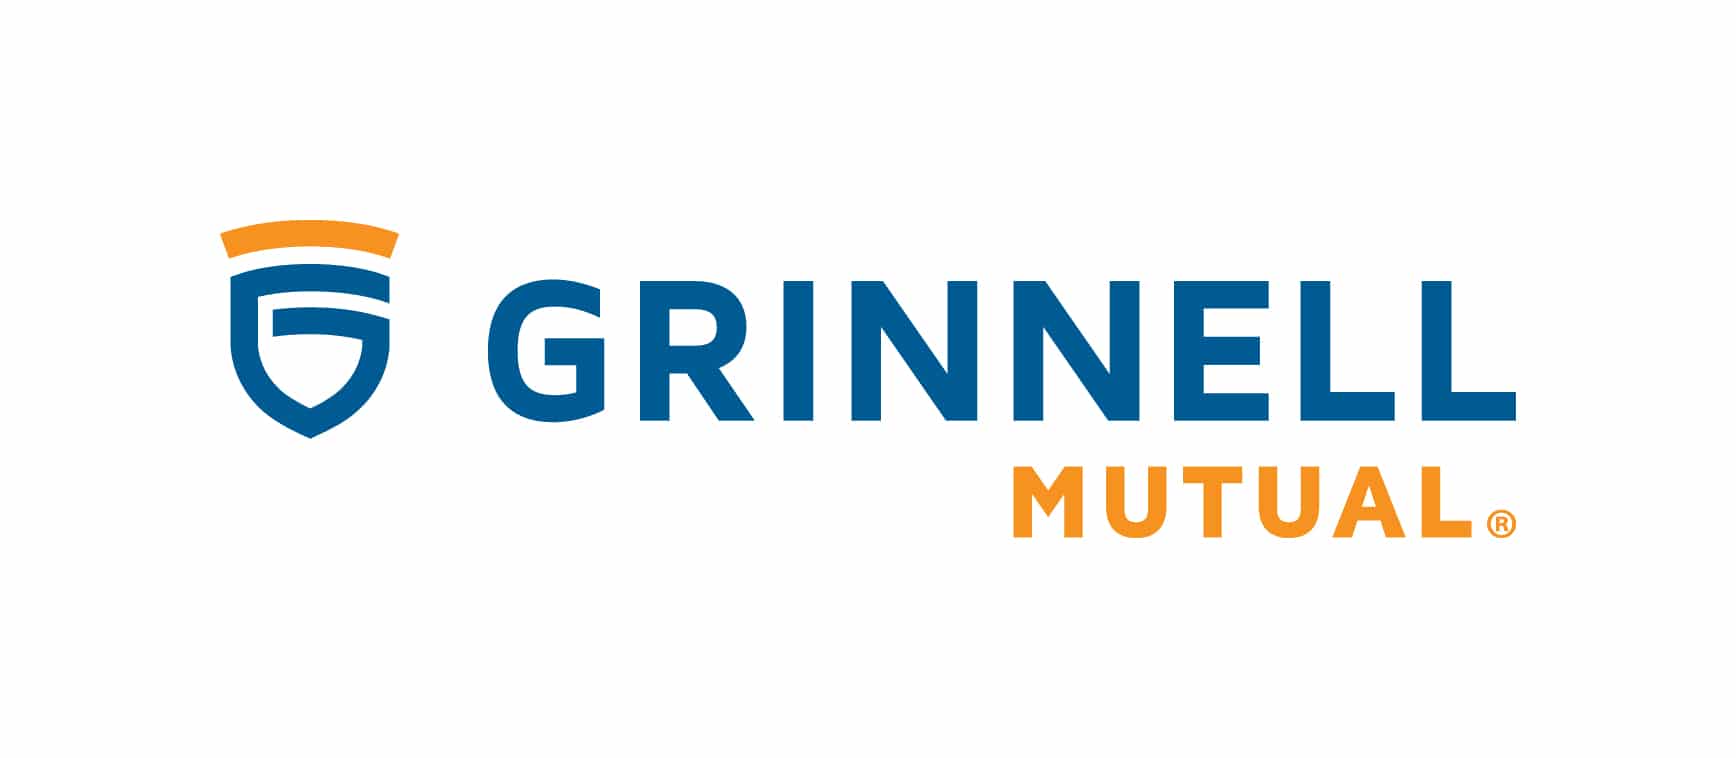 Grinnell Mutual Reinsurance